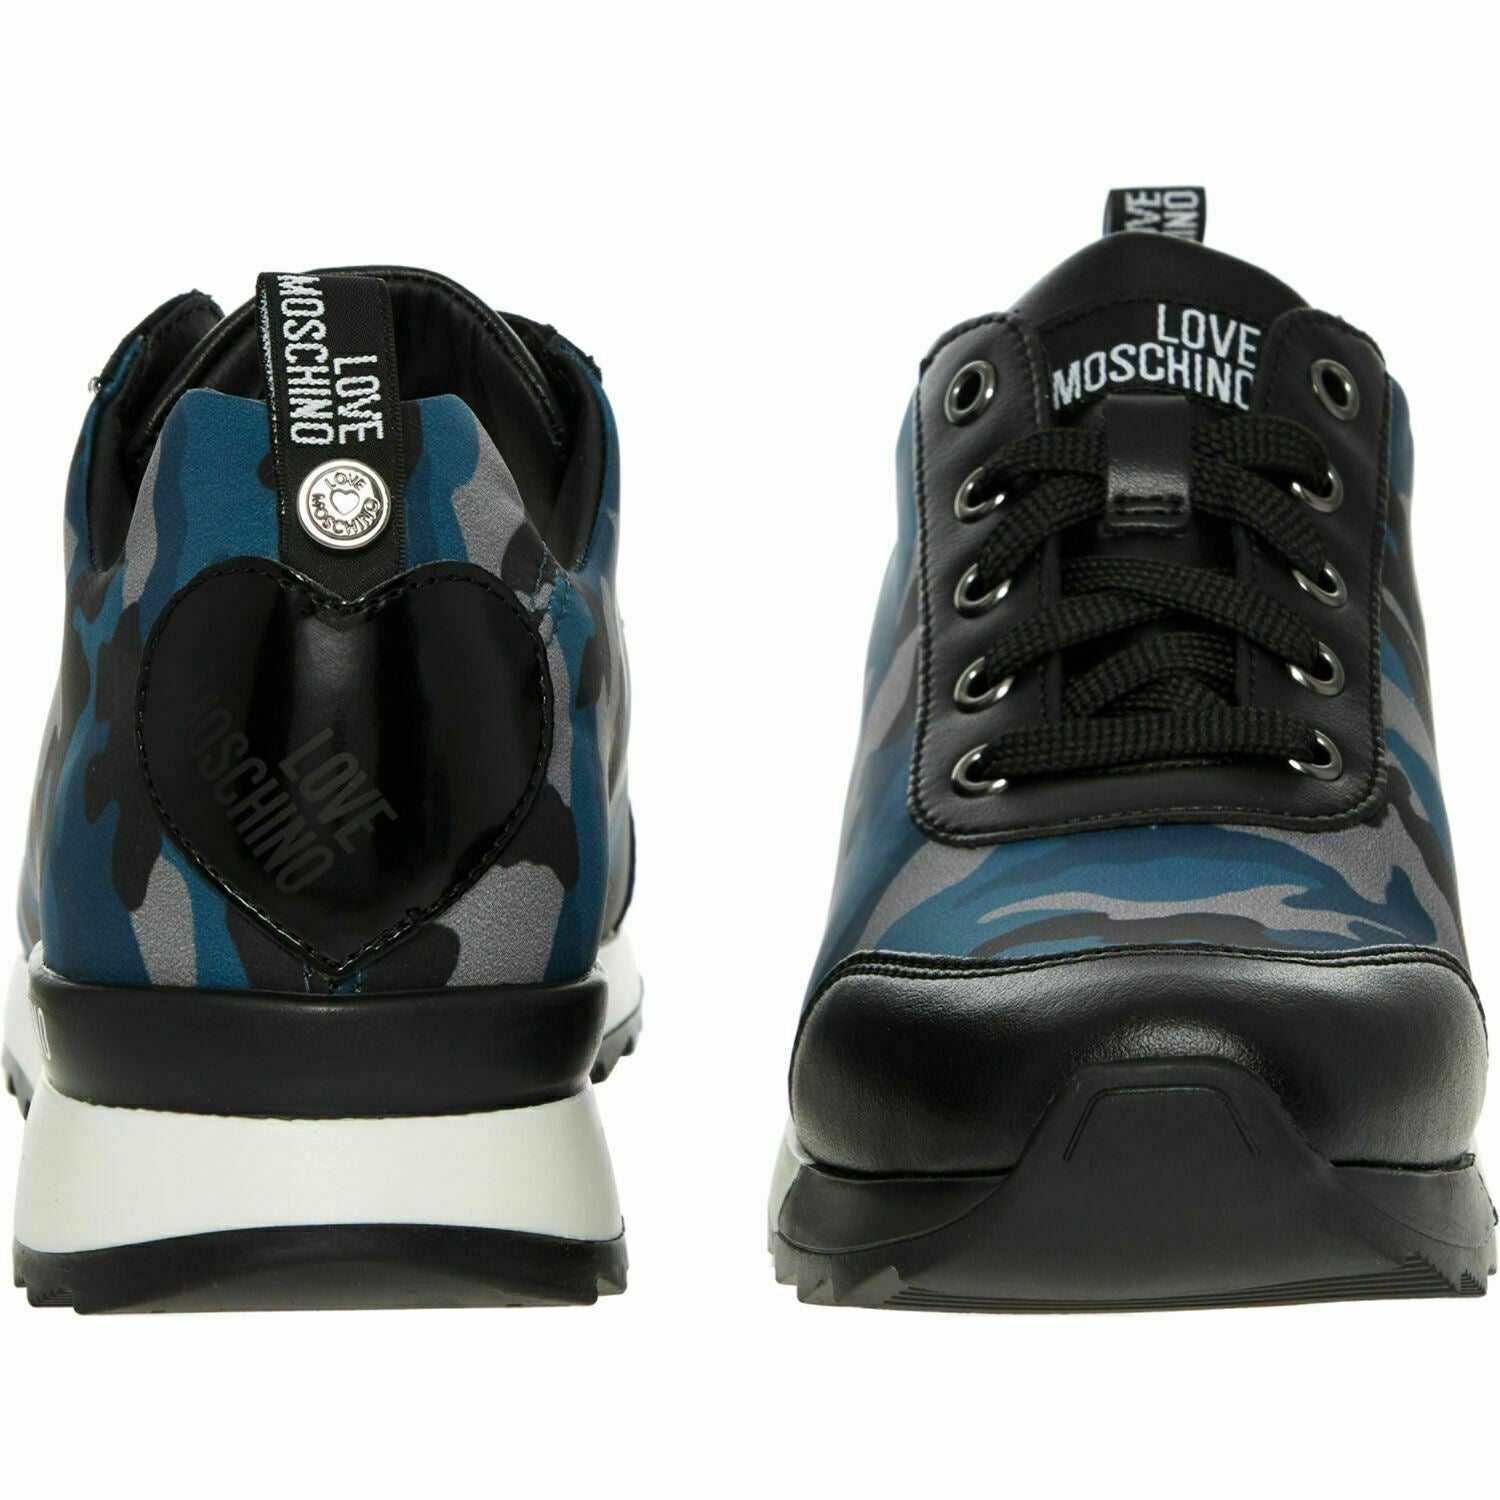 LOVE MOSCHINO Women's Blue Camouflage Print Trainers Shoes, size UK 5 EU 38